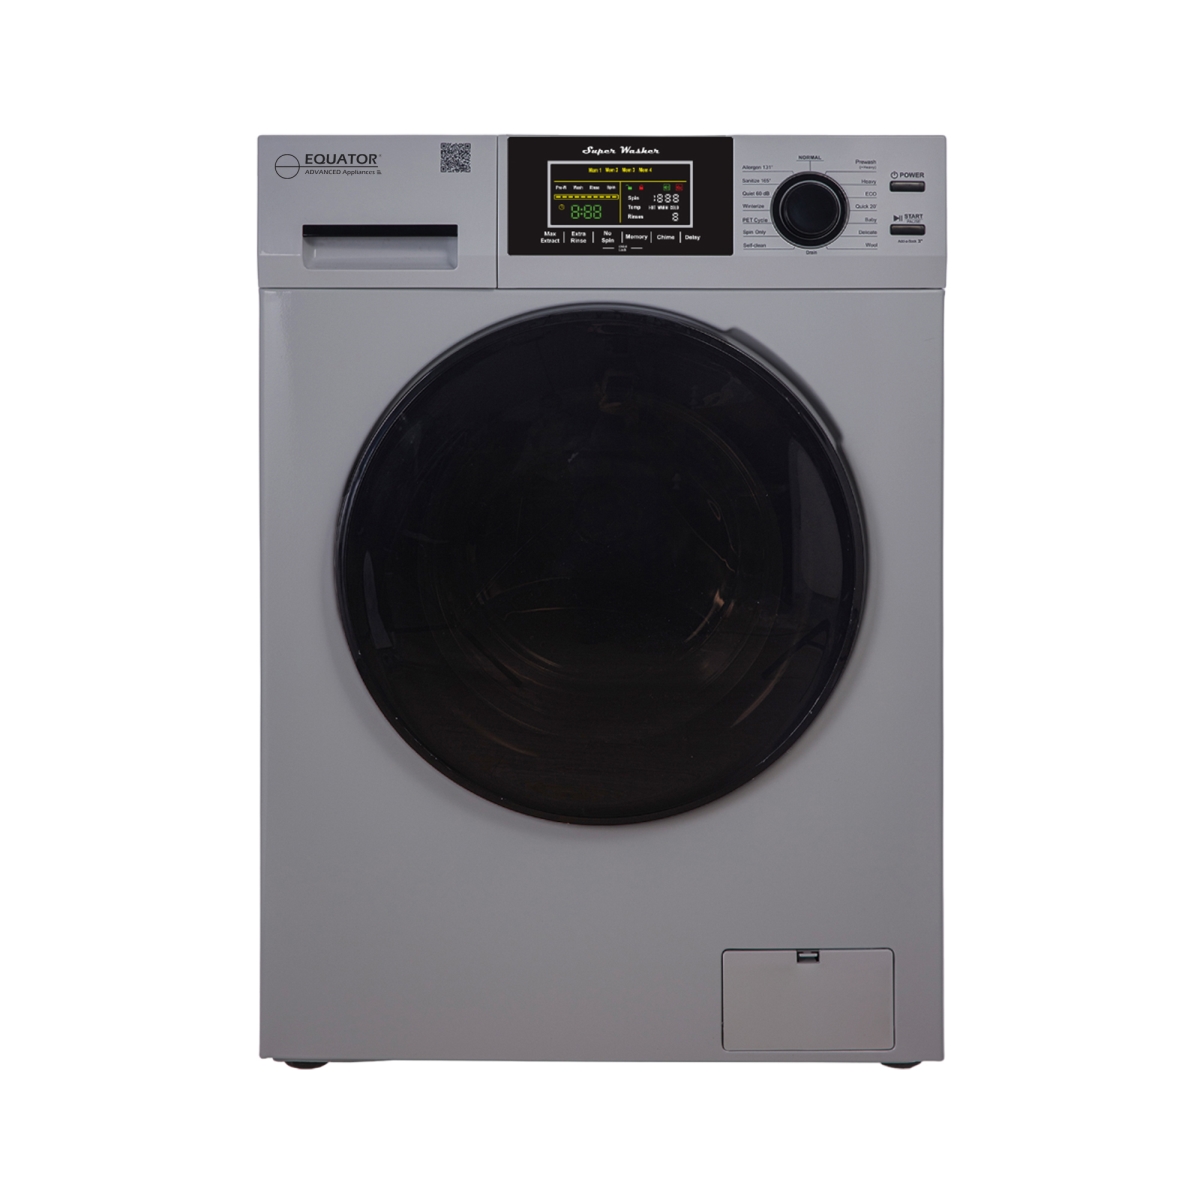 Homestead Equator 1.6 cu.ft./15 lbs White 110V Front load Washer 15 programs + Pet Cycle